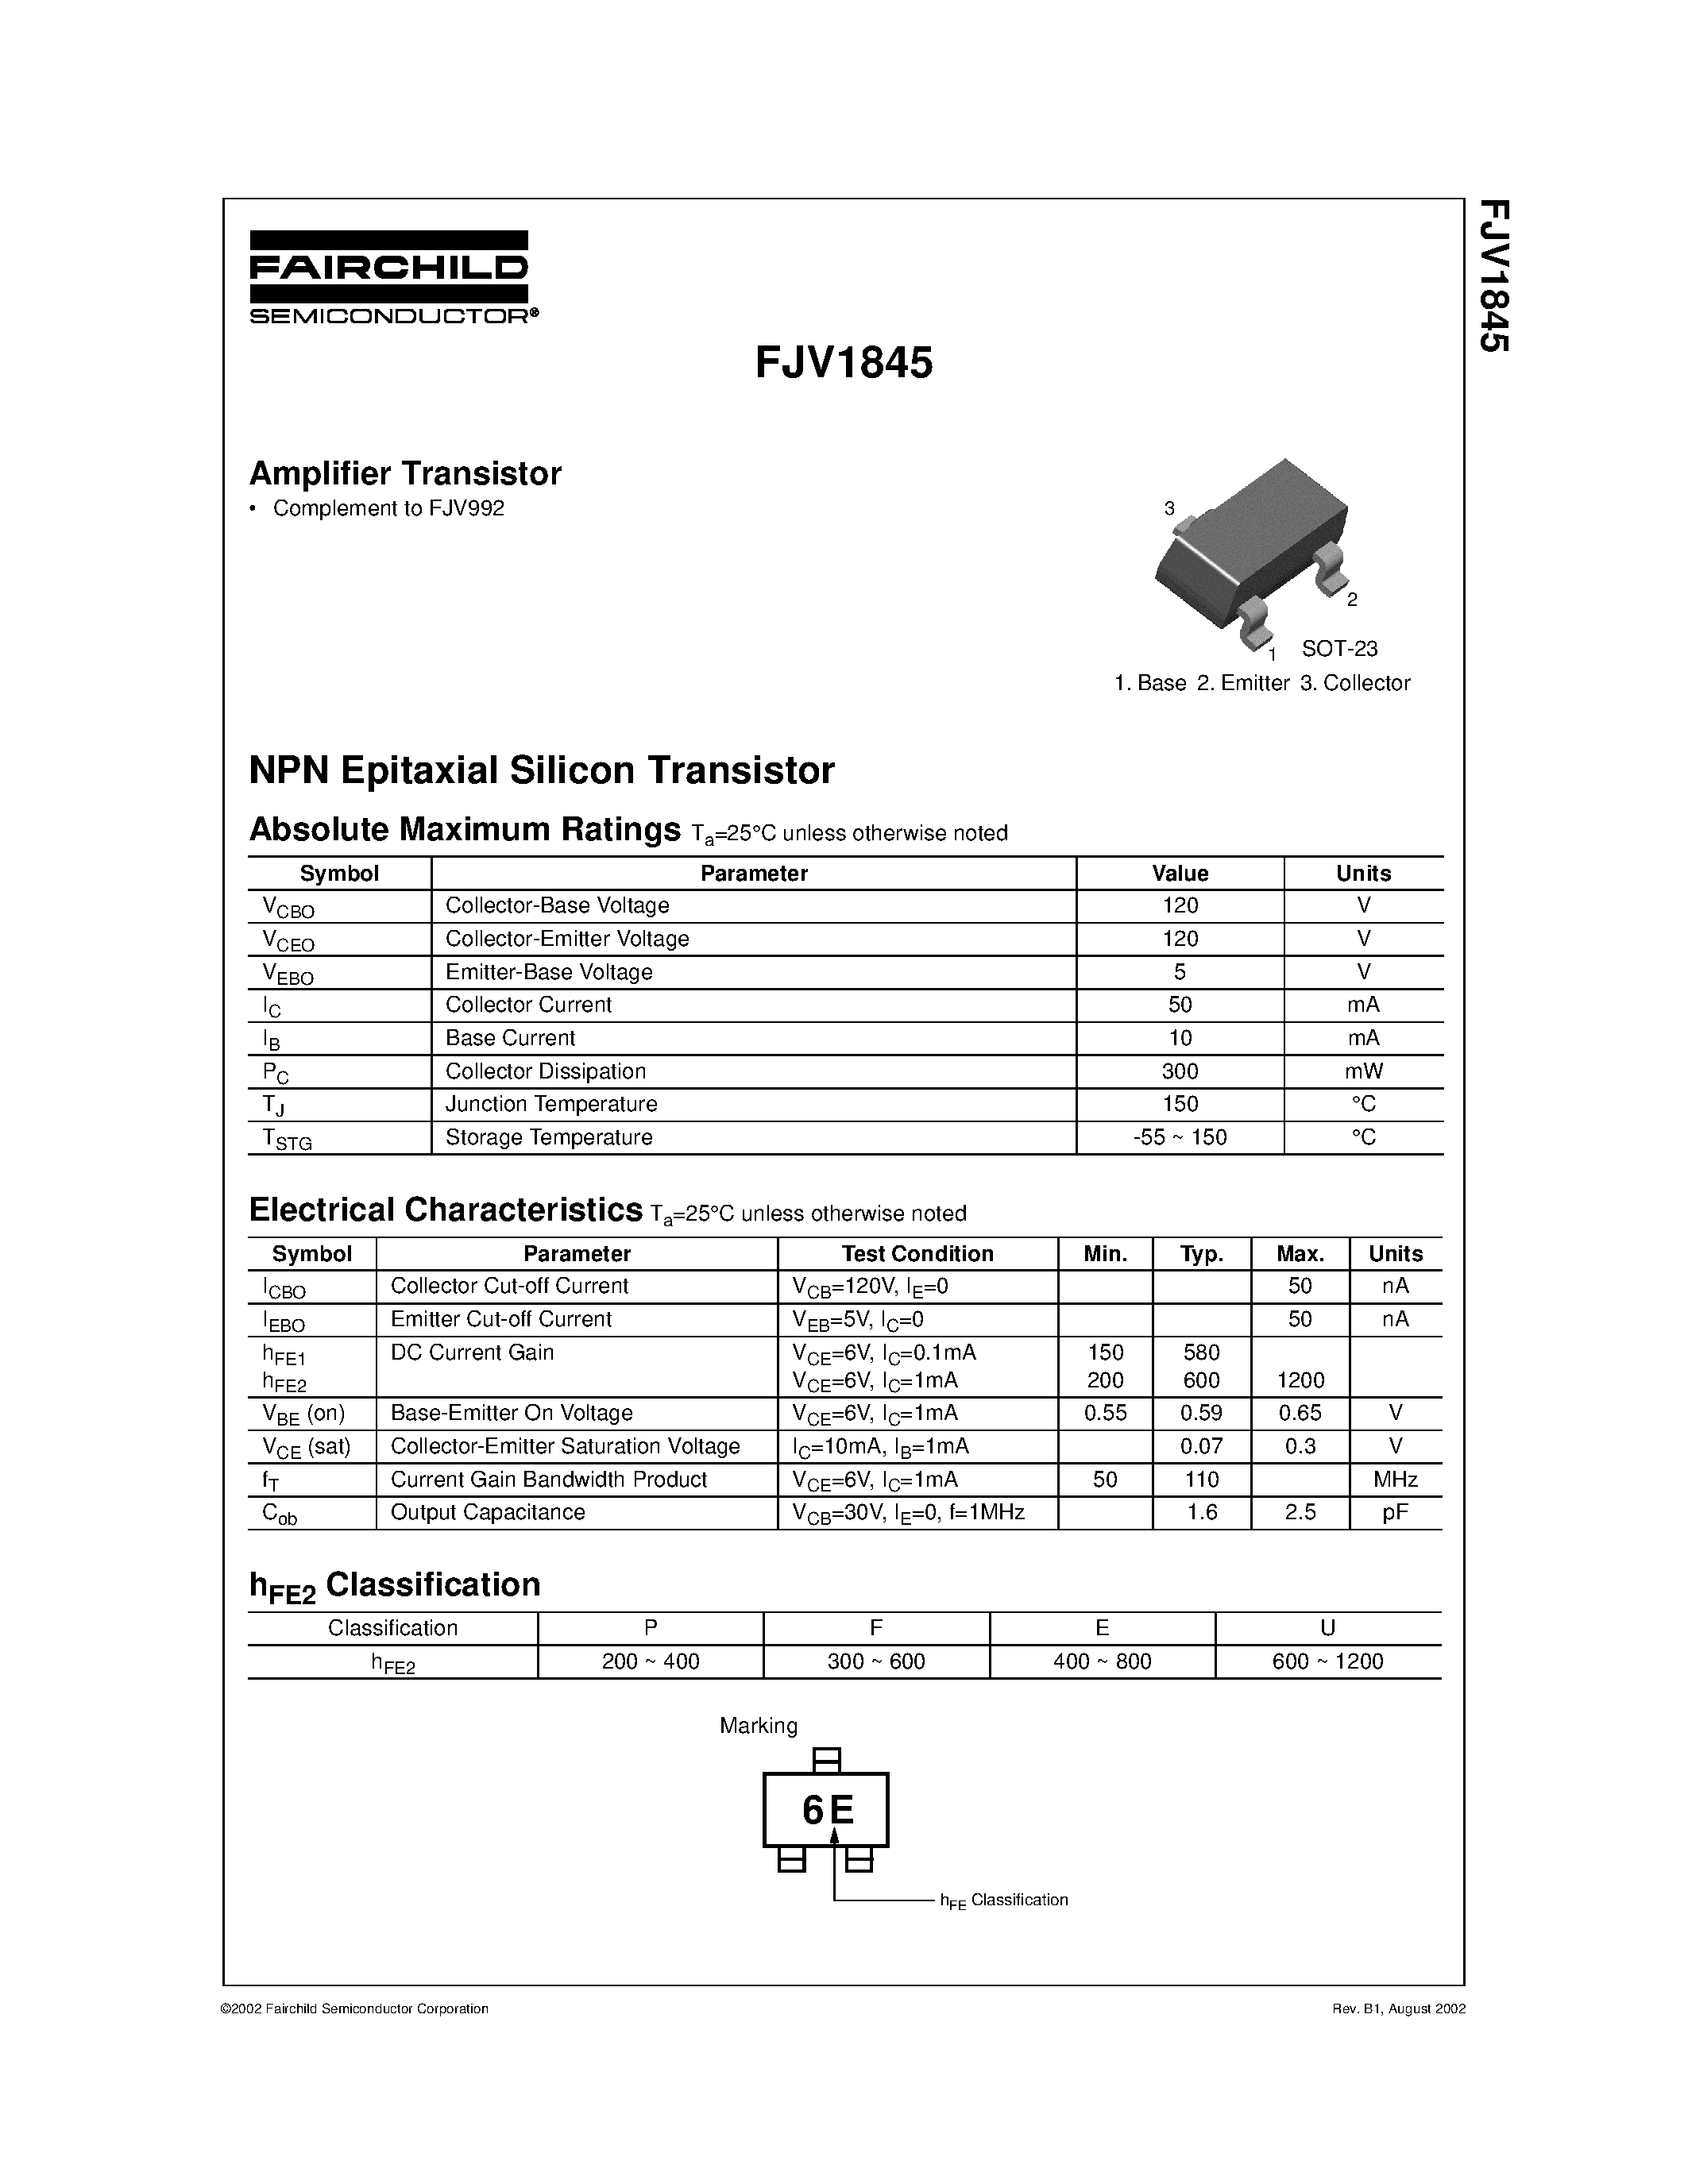 Даташит FJV1845 - NPN Epitaxial Silicon Transistor страница 1